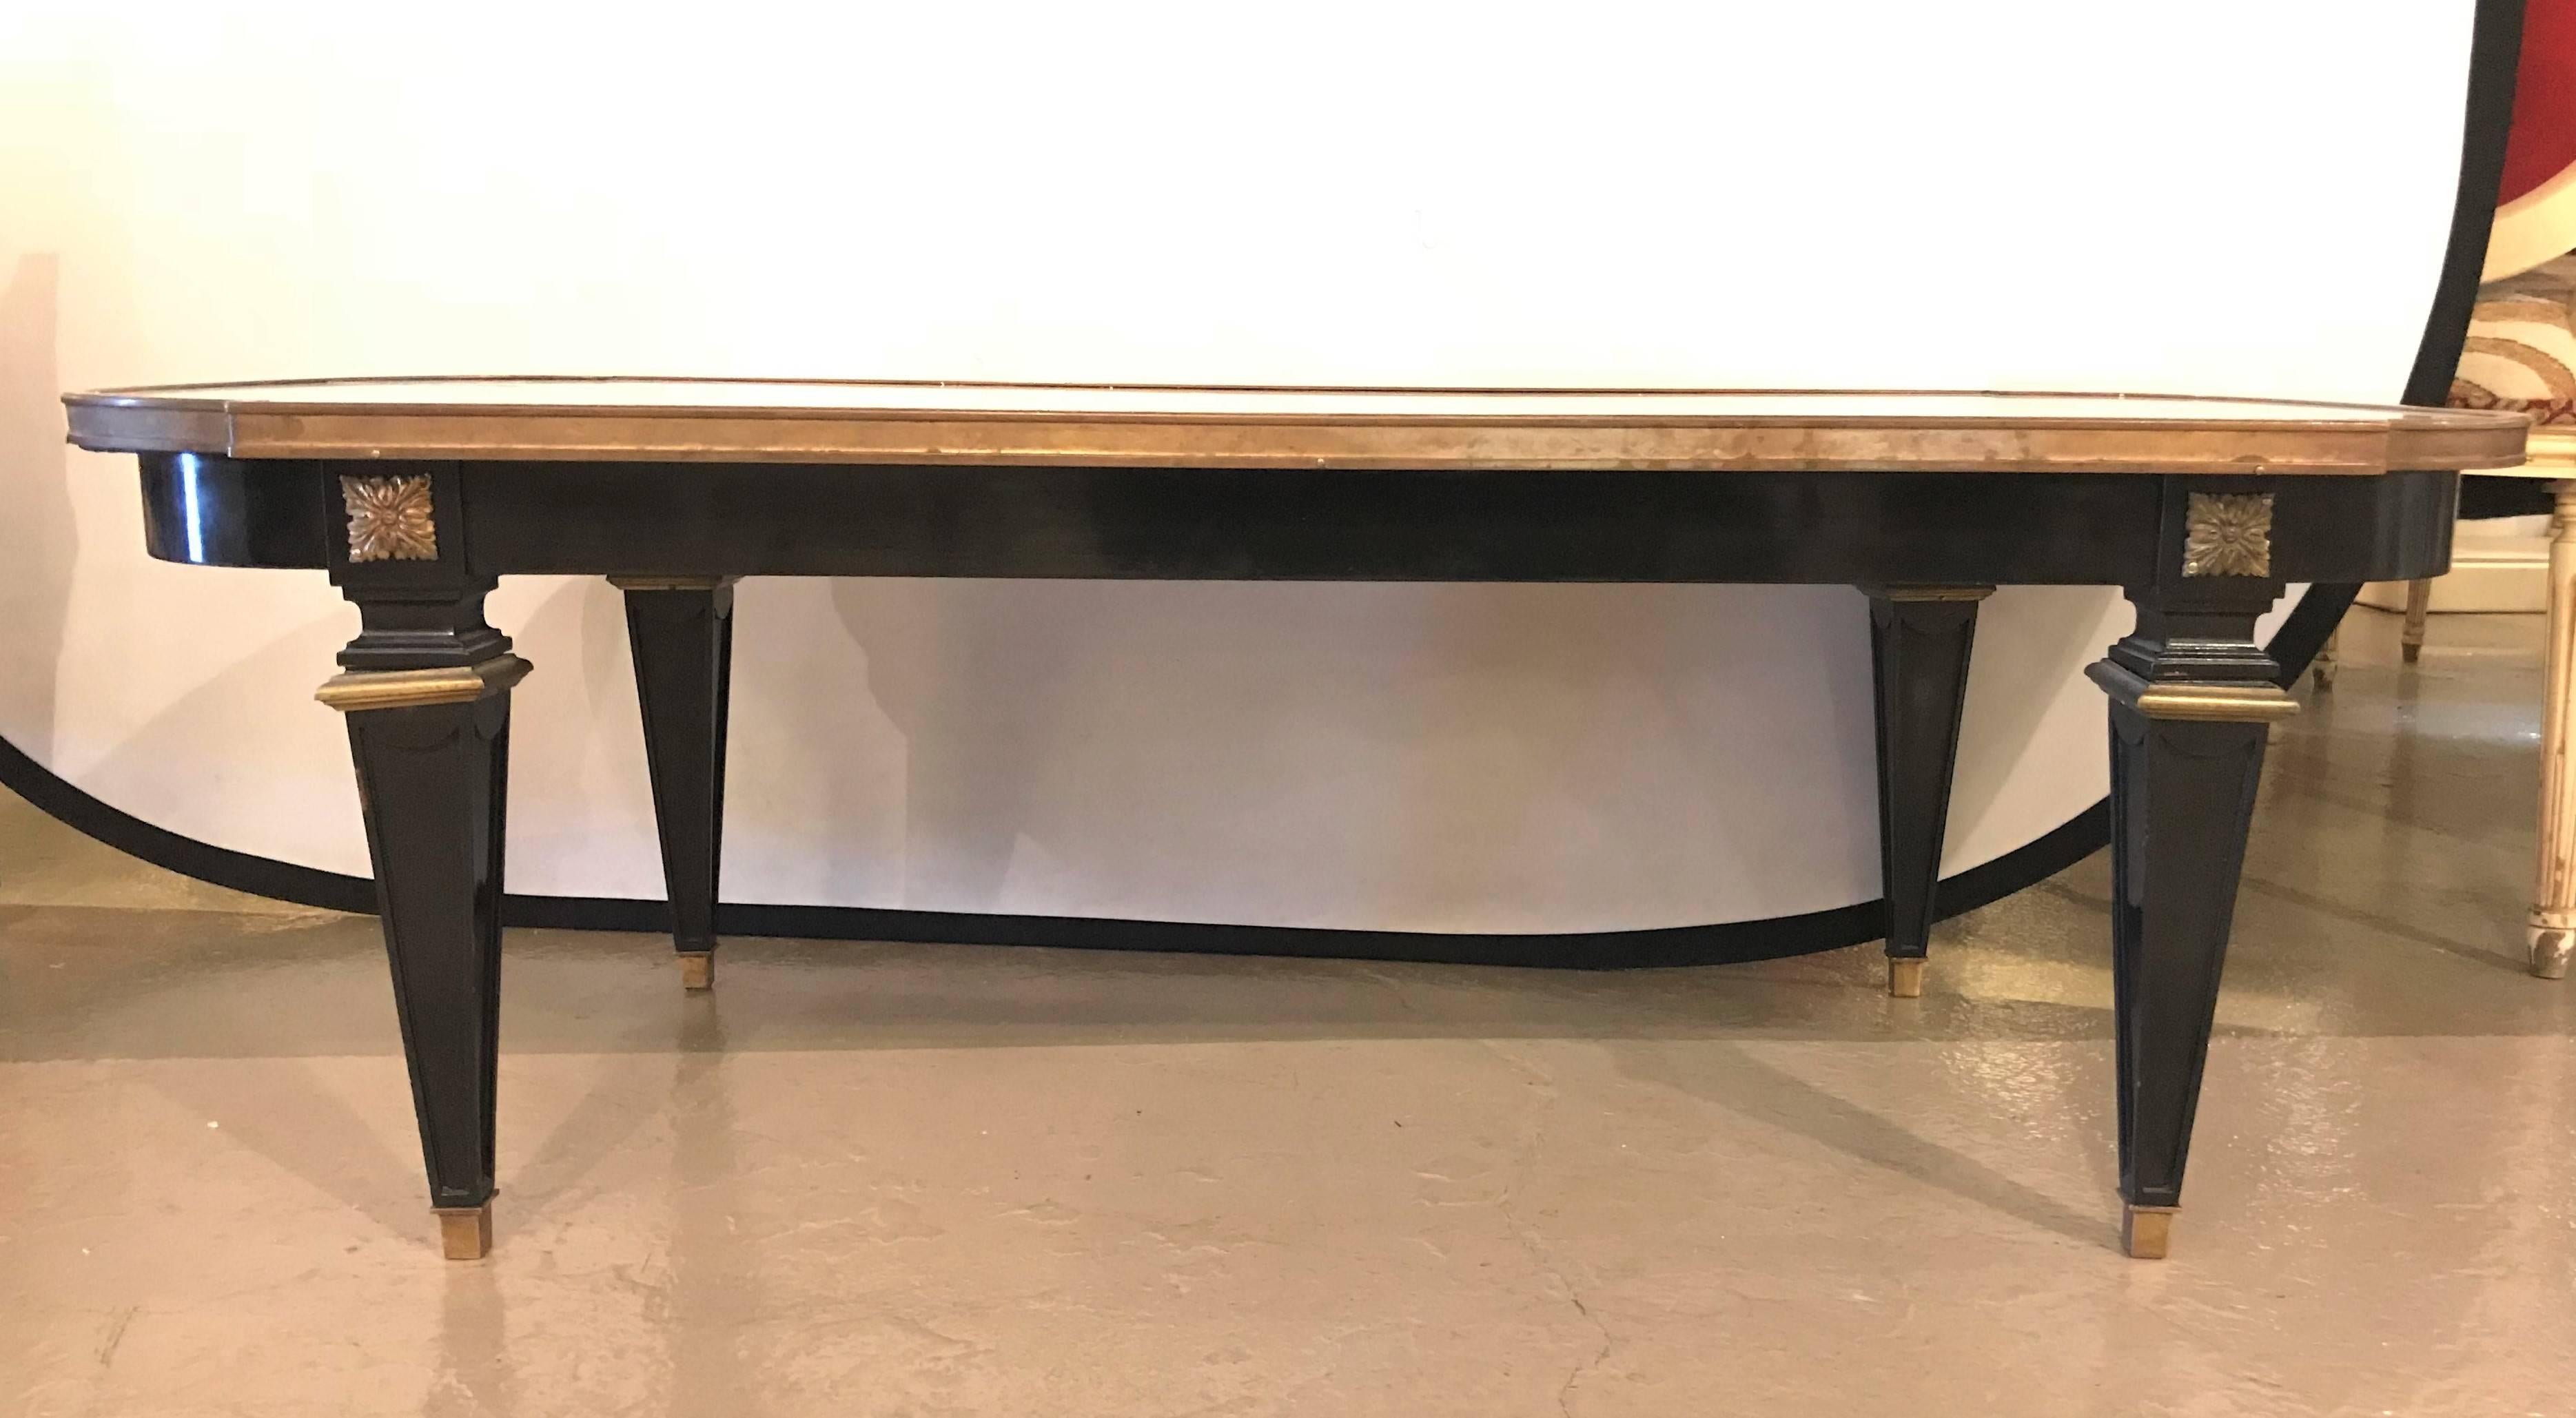 Ebonized marble-top coffee table stamped Jansen in the Louis XVI fashion with bronze mounts. This recently ebonized coffee table base supports a white marble top with gray veins that sits in a bronze frame. This finely constructed coffee table